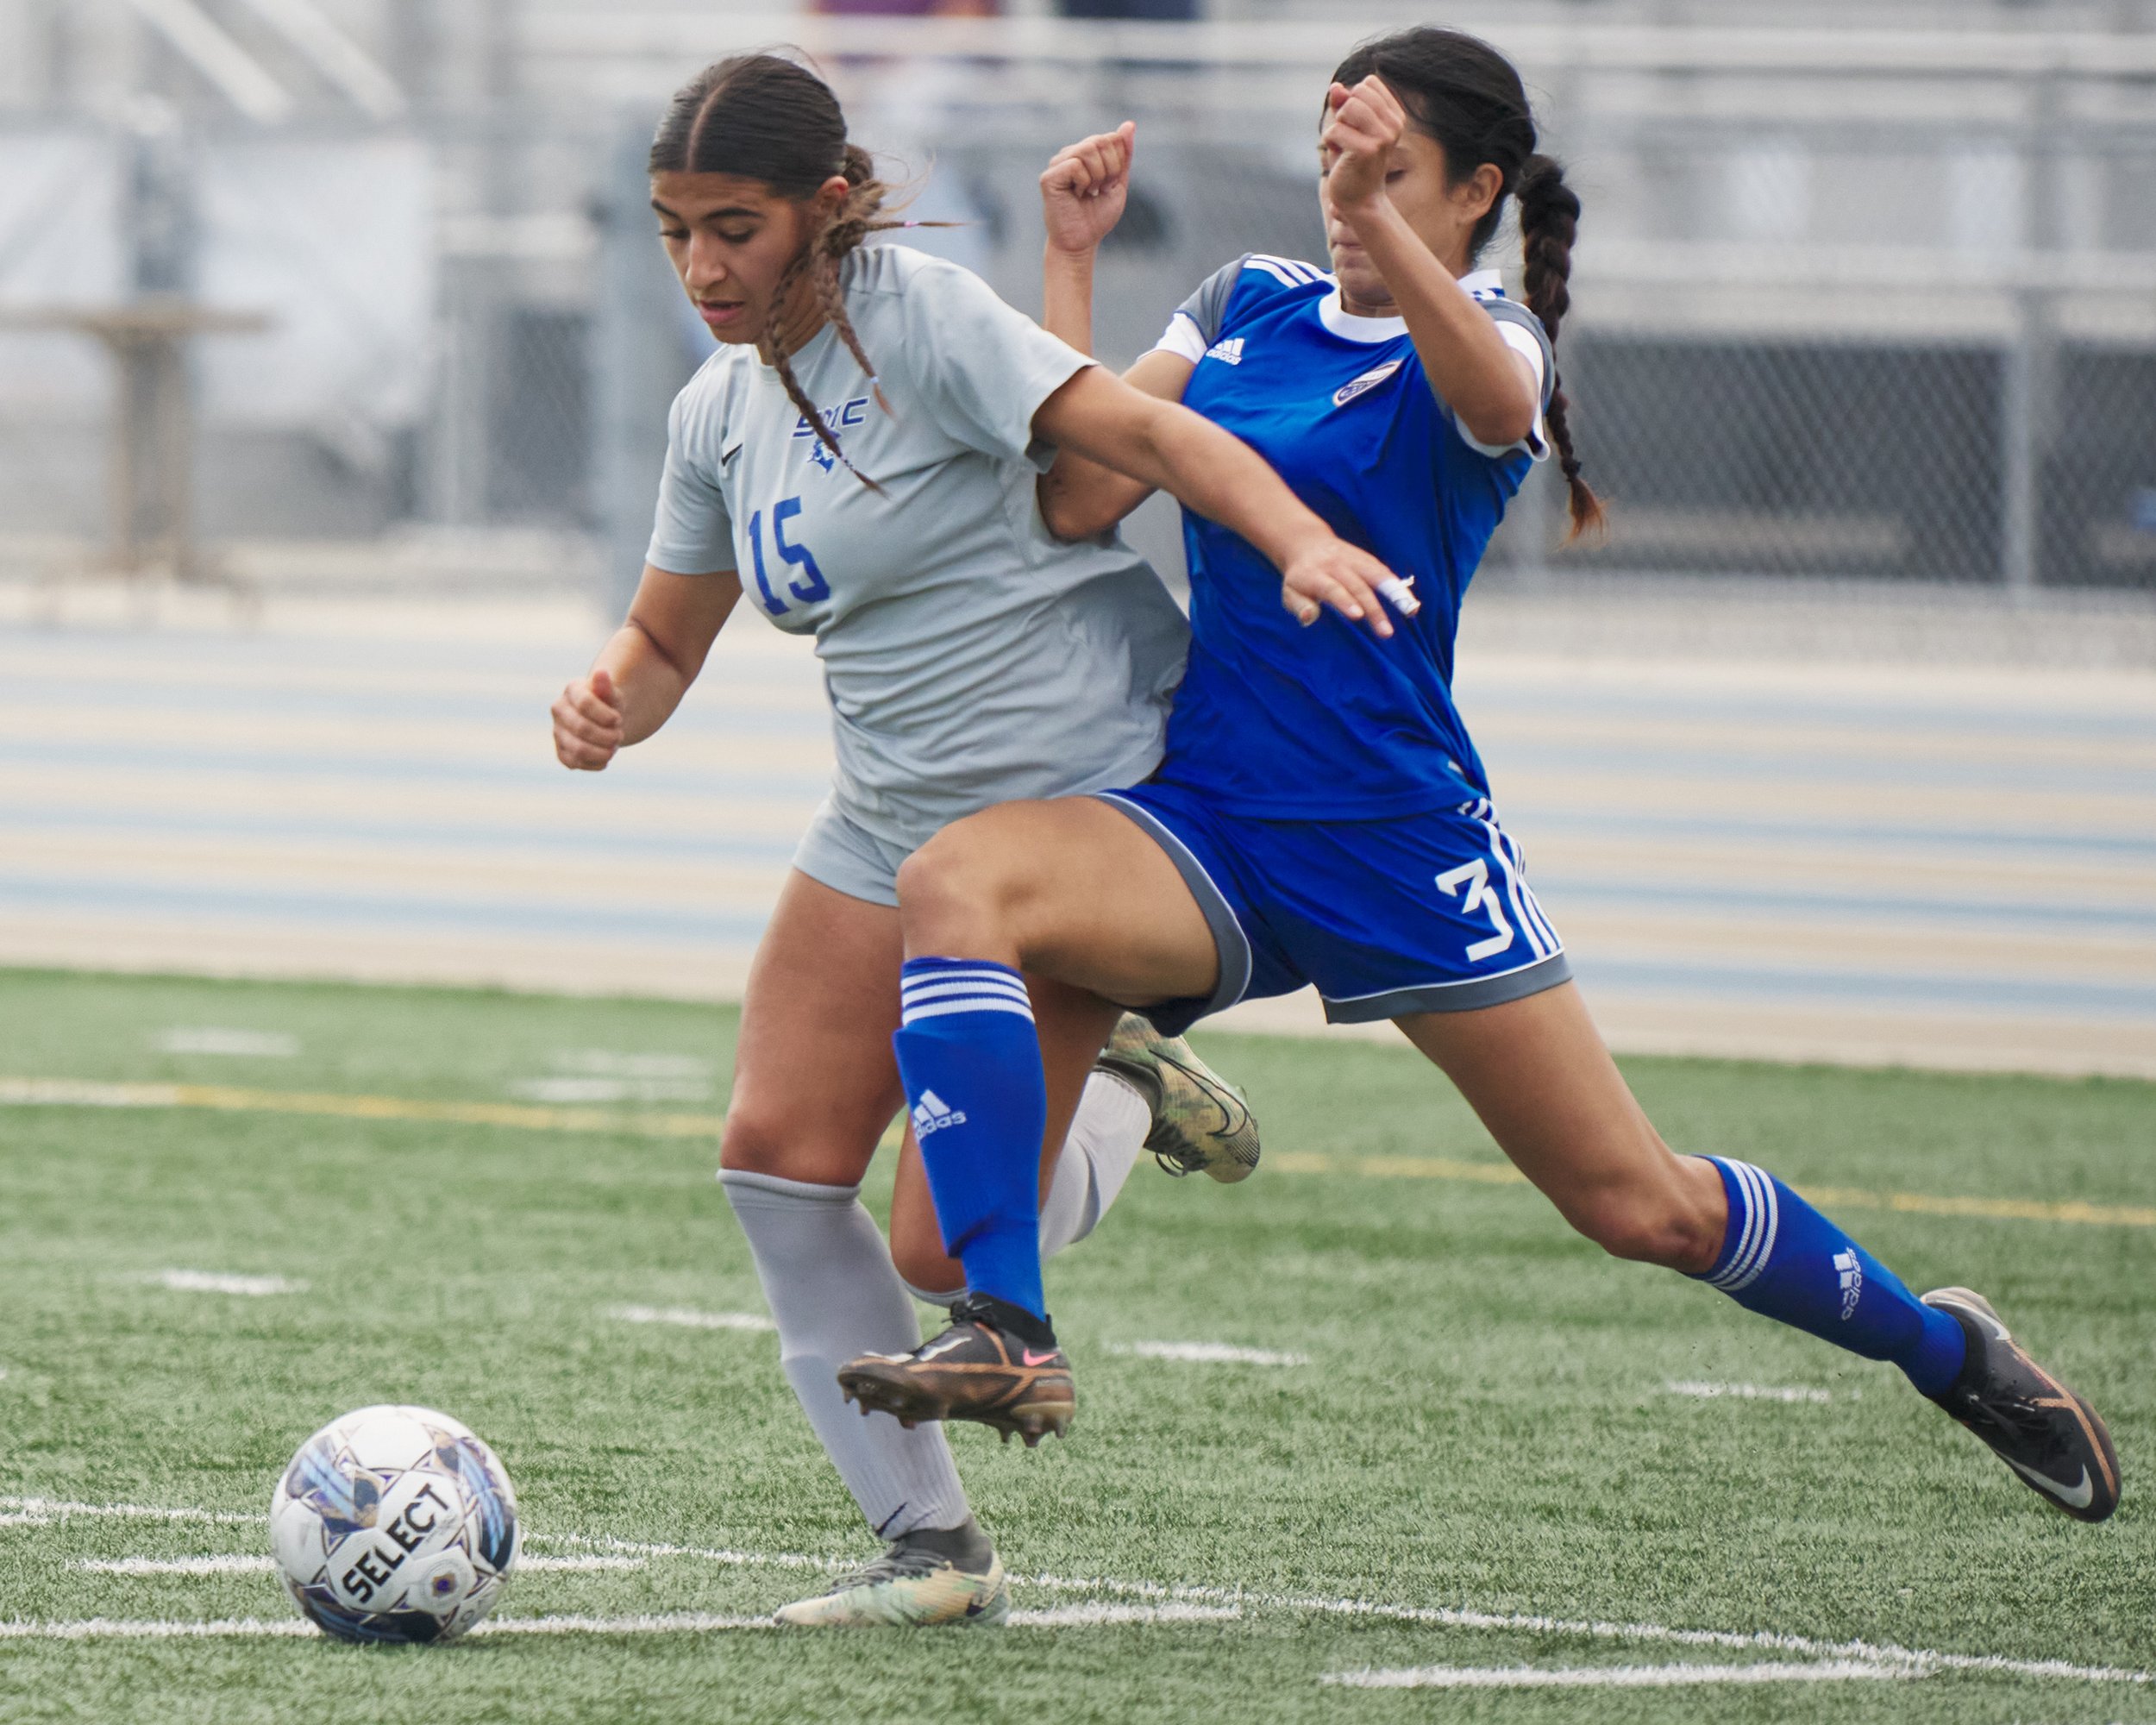  Santa Monica College Corsairs' Alinna Savaterre and West Los Angeles College Wildcats' Dalia Romo during the women's soccer match on Friday, Sept. 29, 2023, at Wildcat Stadium in Los Angeles, Calif. The Corsairs won 5-0. (Nicholas McCall | The Corsa